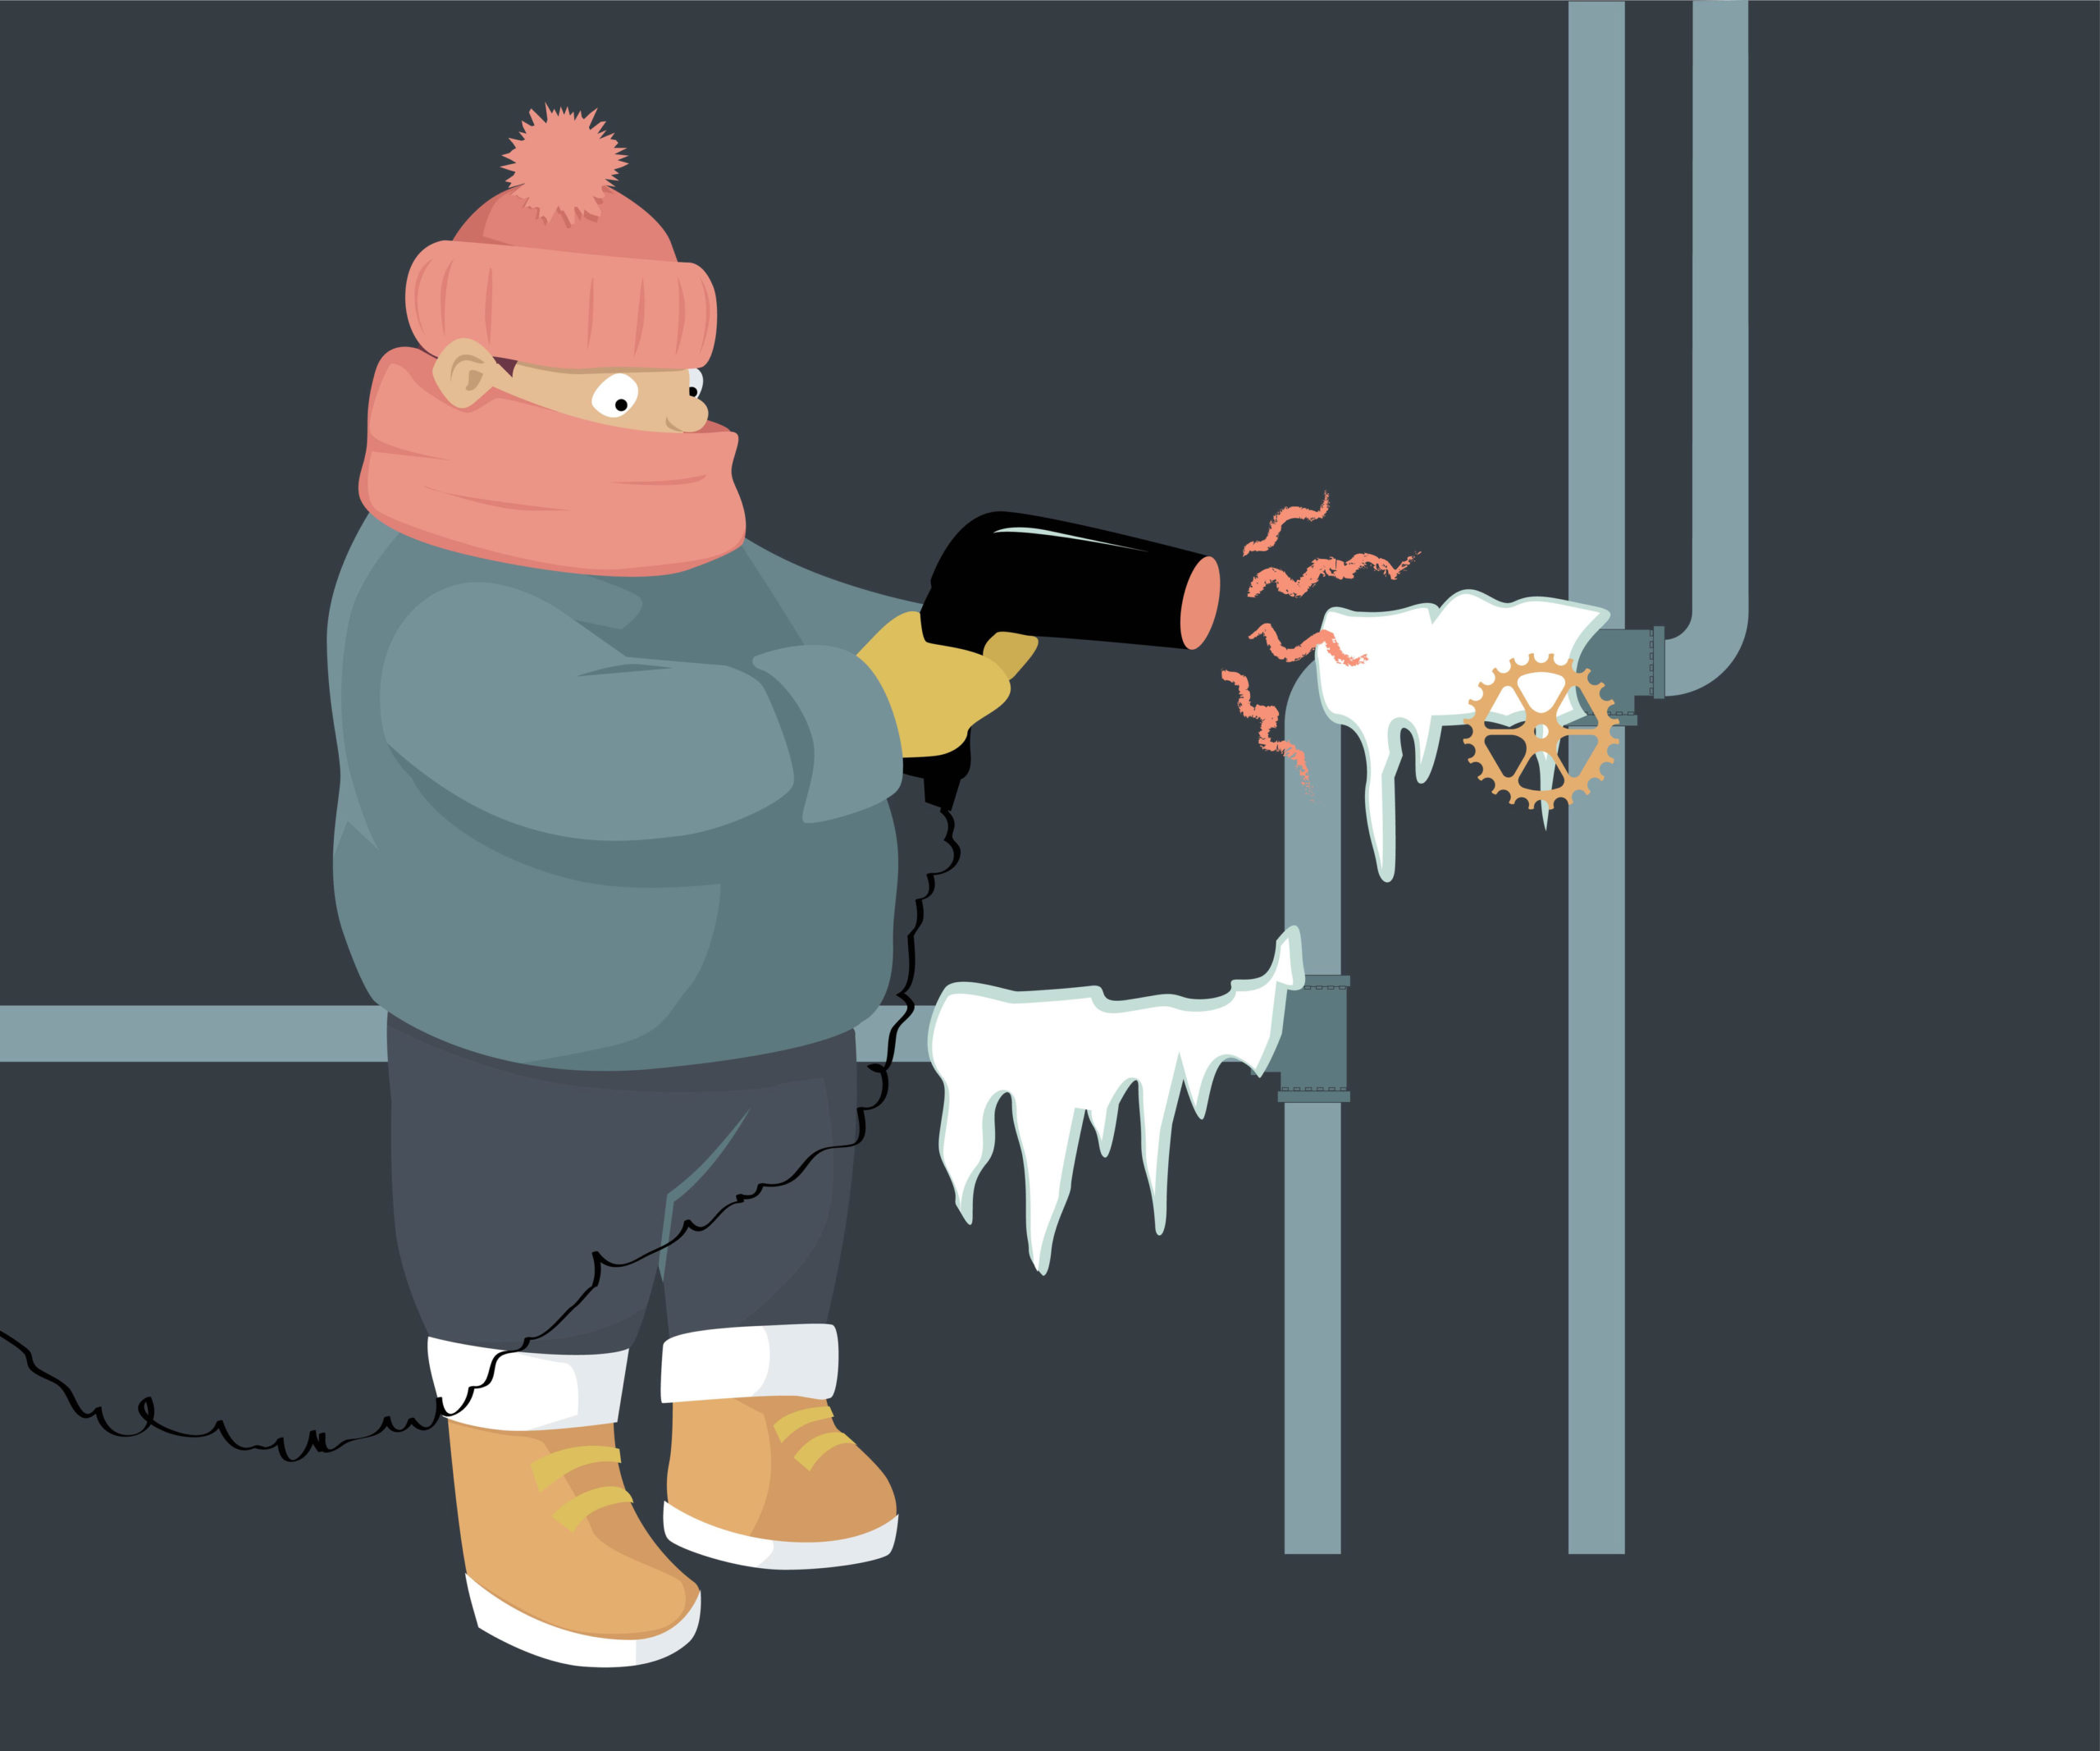 Thawing your frozen pipes